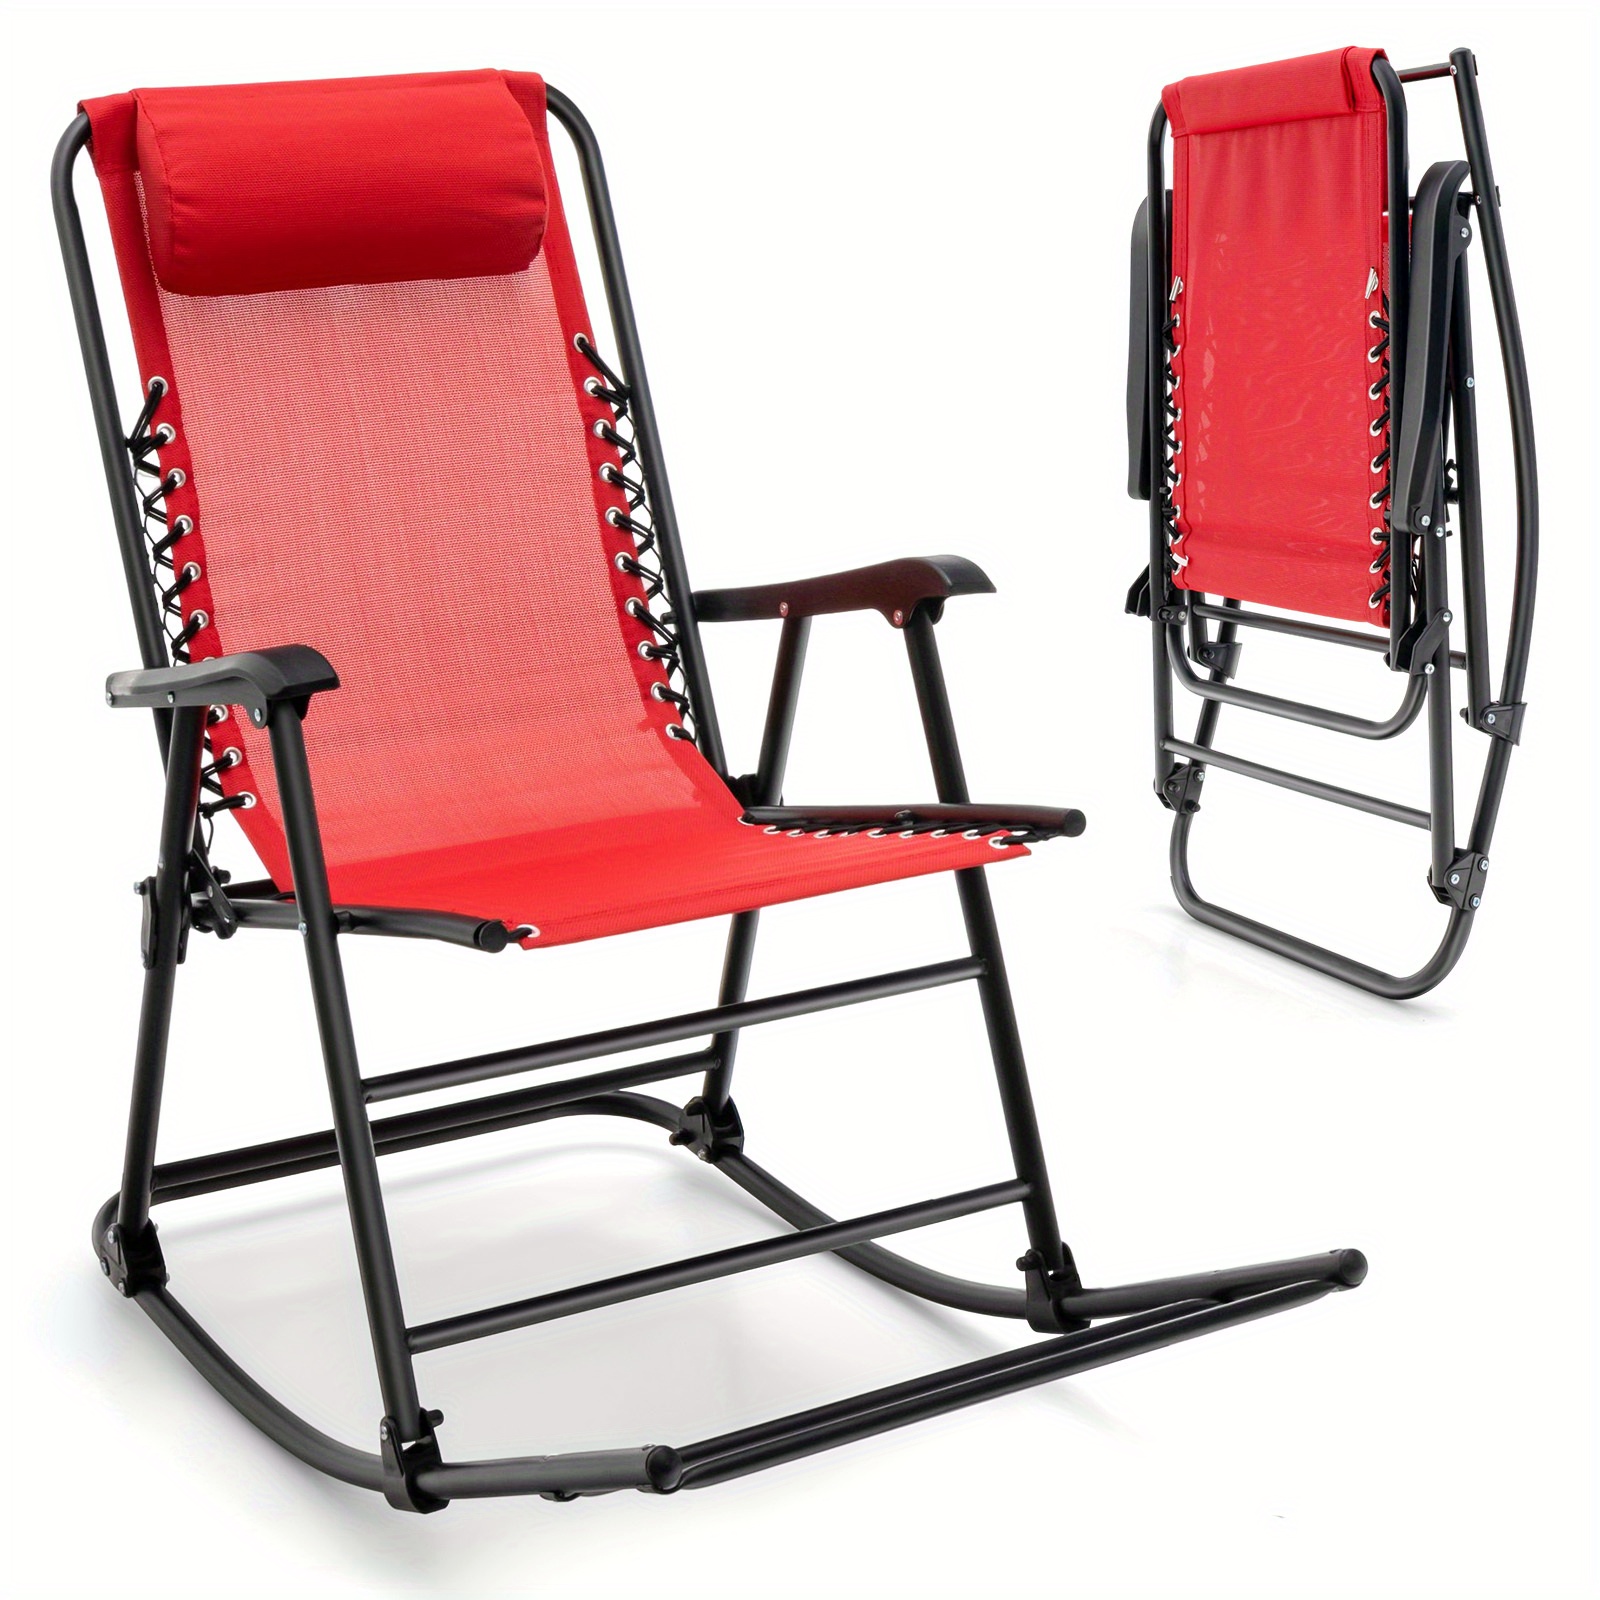 

Homasis Patio Camping Rocking Chair Folding Rocker Footrest Lightweight Outdoor Red